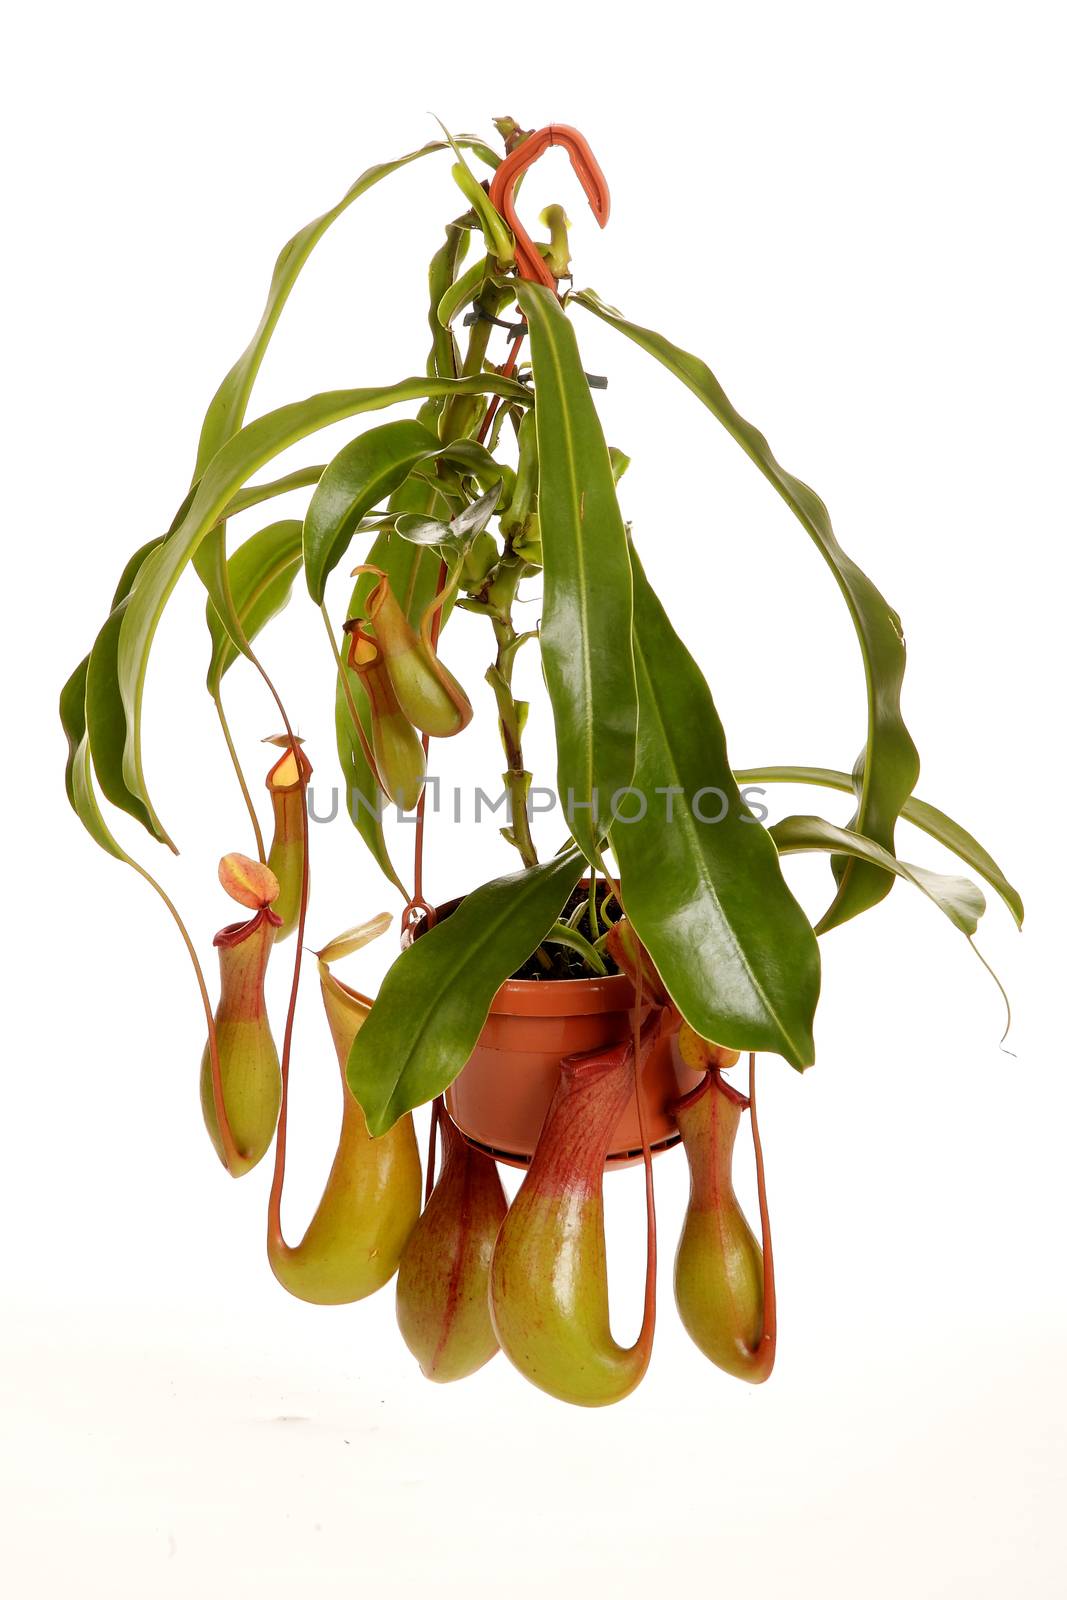 Nepenthe tropical carnivore plant on an white background by sveter